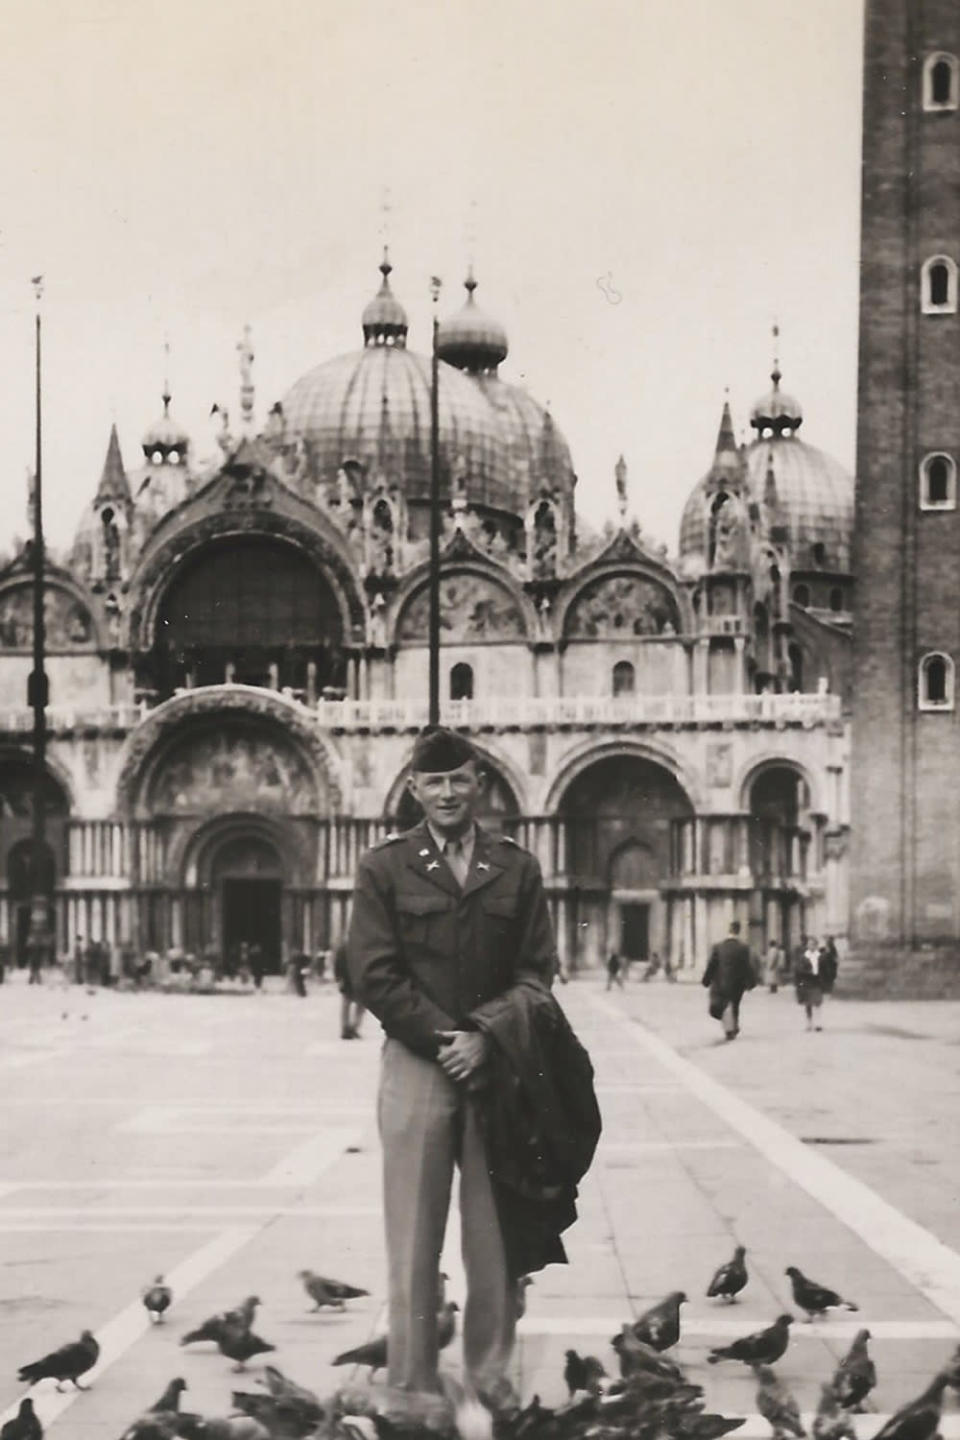 <div class="inline-image__caption"><p>My father in St. Mark's Square in Venice, in 1945</p></div> <div class="inline-image__credit"> Courtesy David Rothkopf</div>